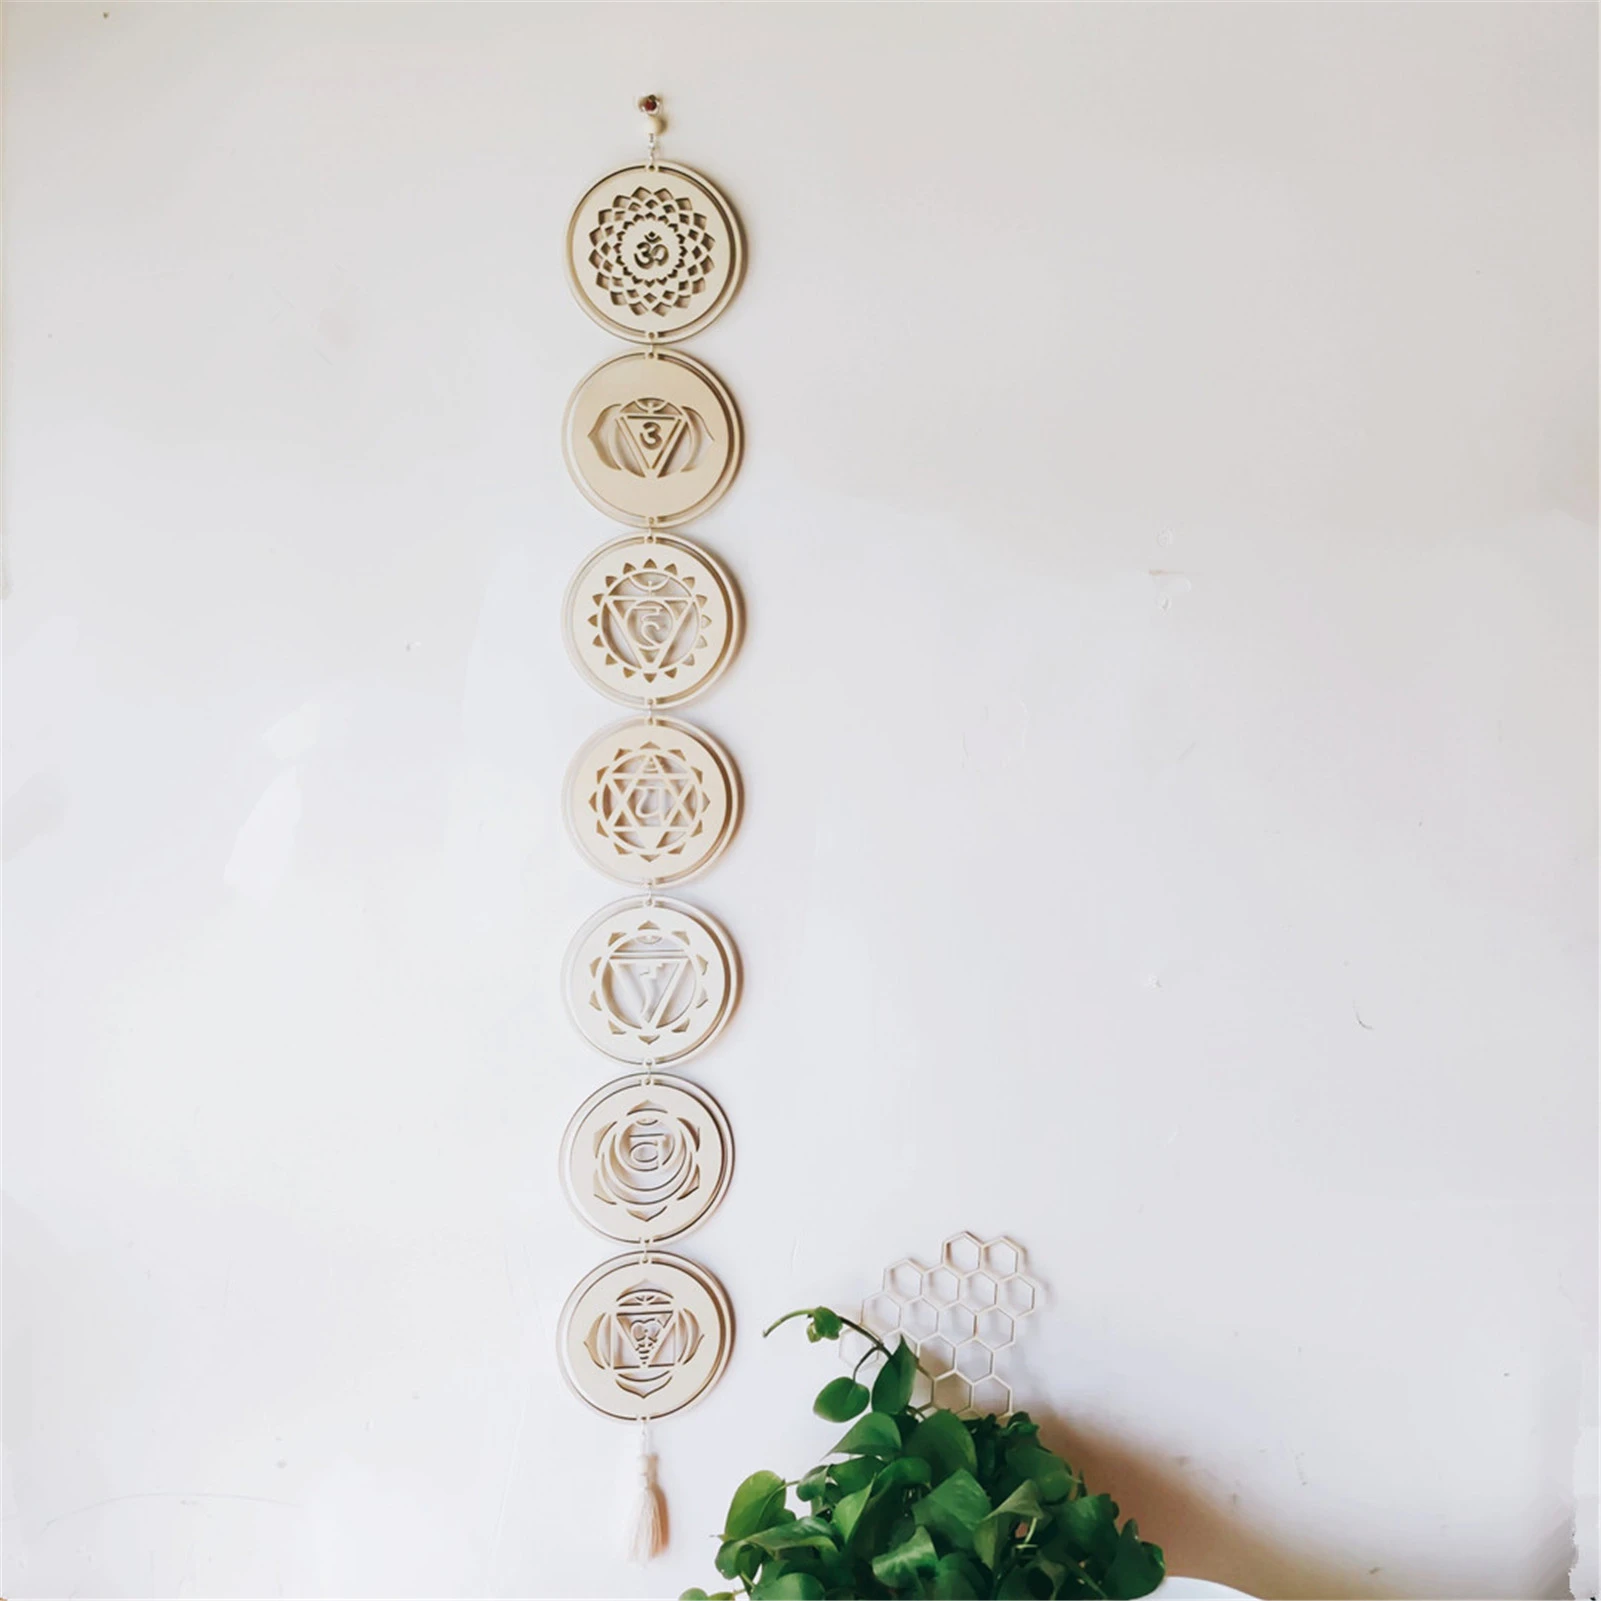 Chakra Healing Wall Art Decoration 7 Rings Wooden Home Wall Hanging Decor Wood Plate Pendant Ornament Gift